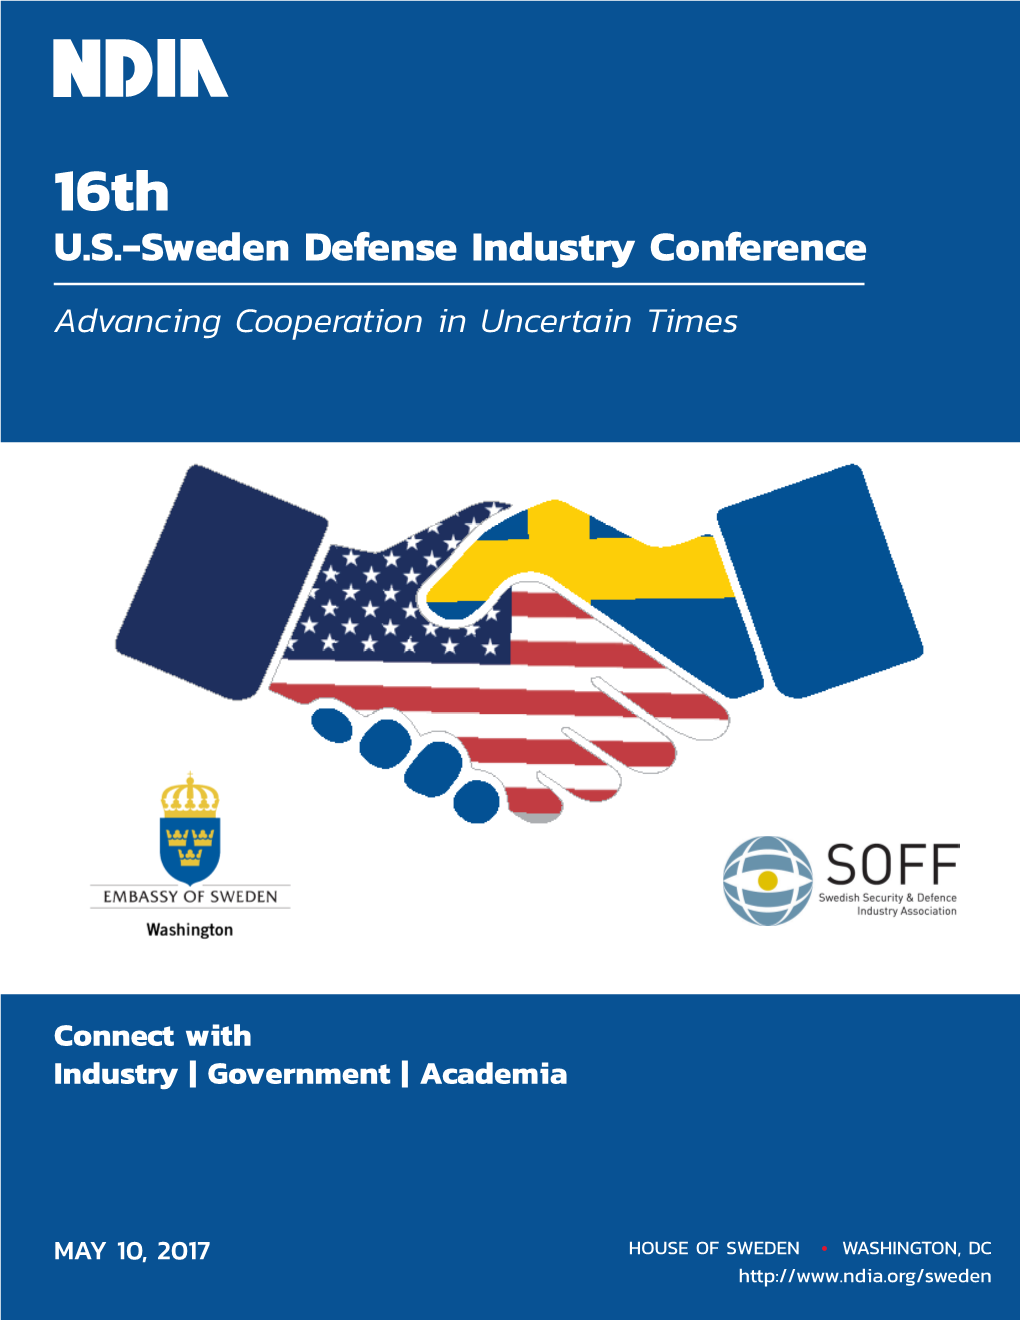 16Th U.S.-Sweden Defense Industry Conference Advancing Cooperation in Uncertain Times